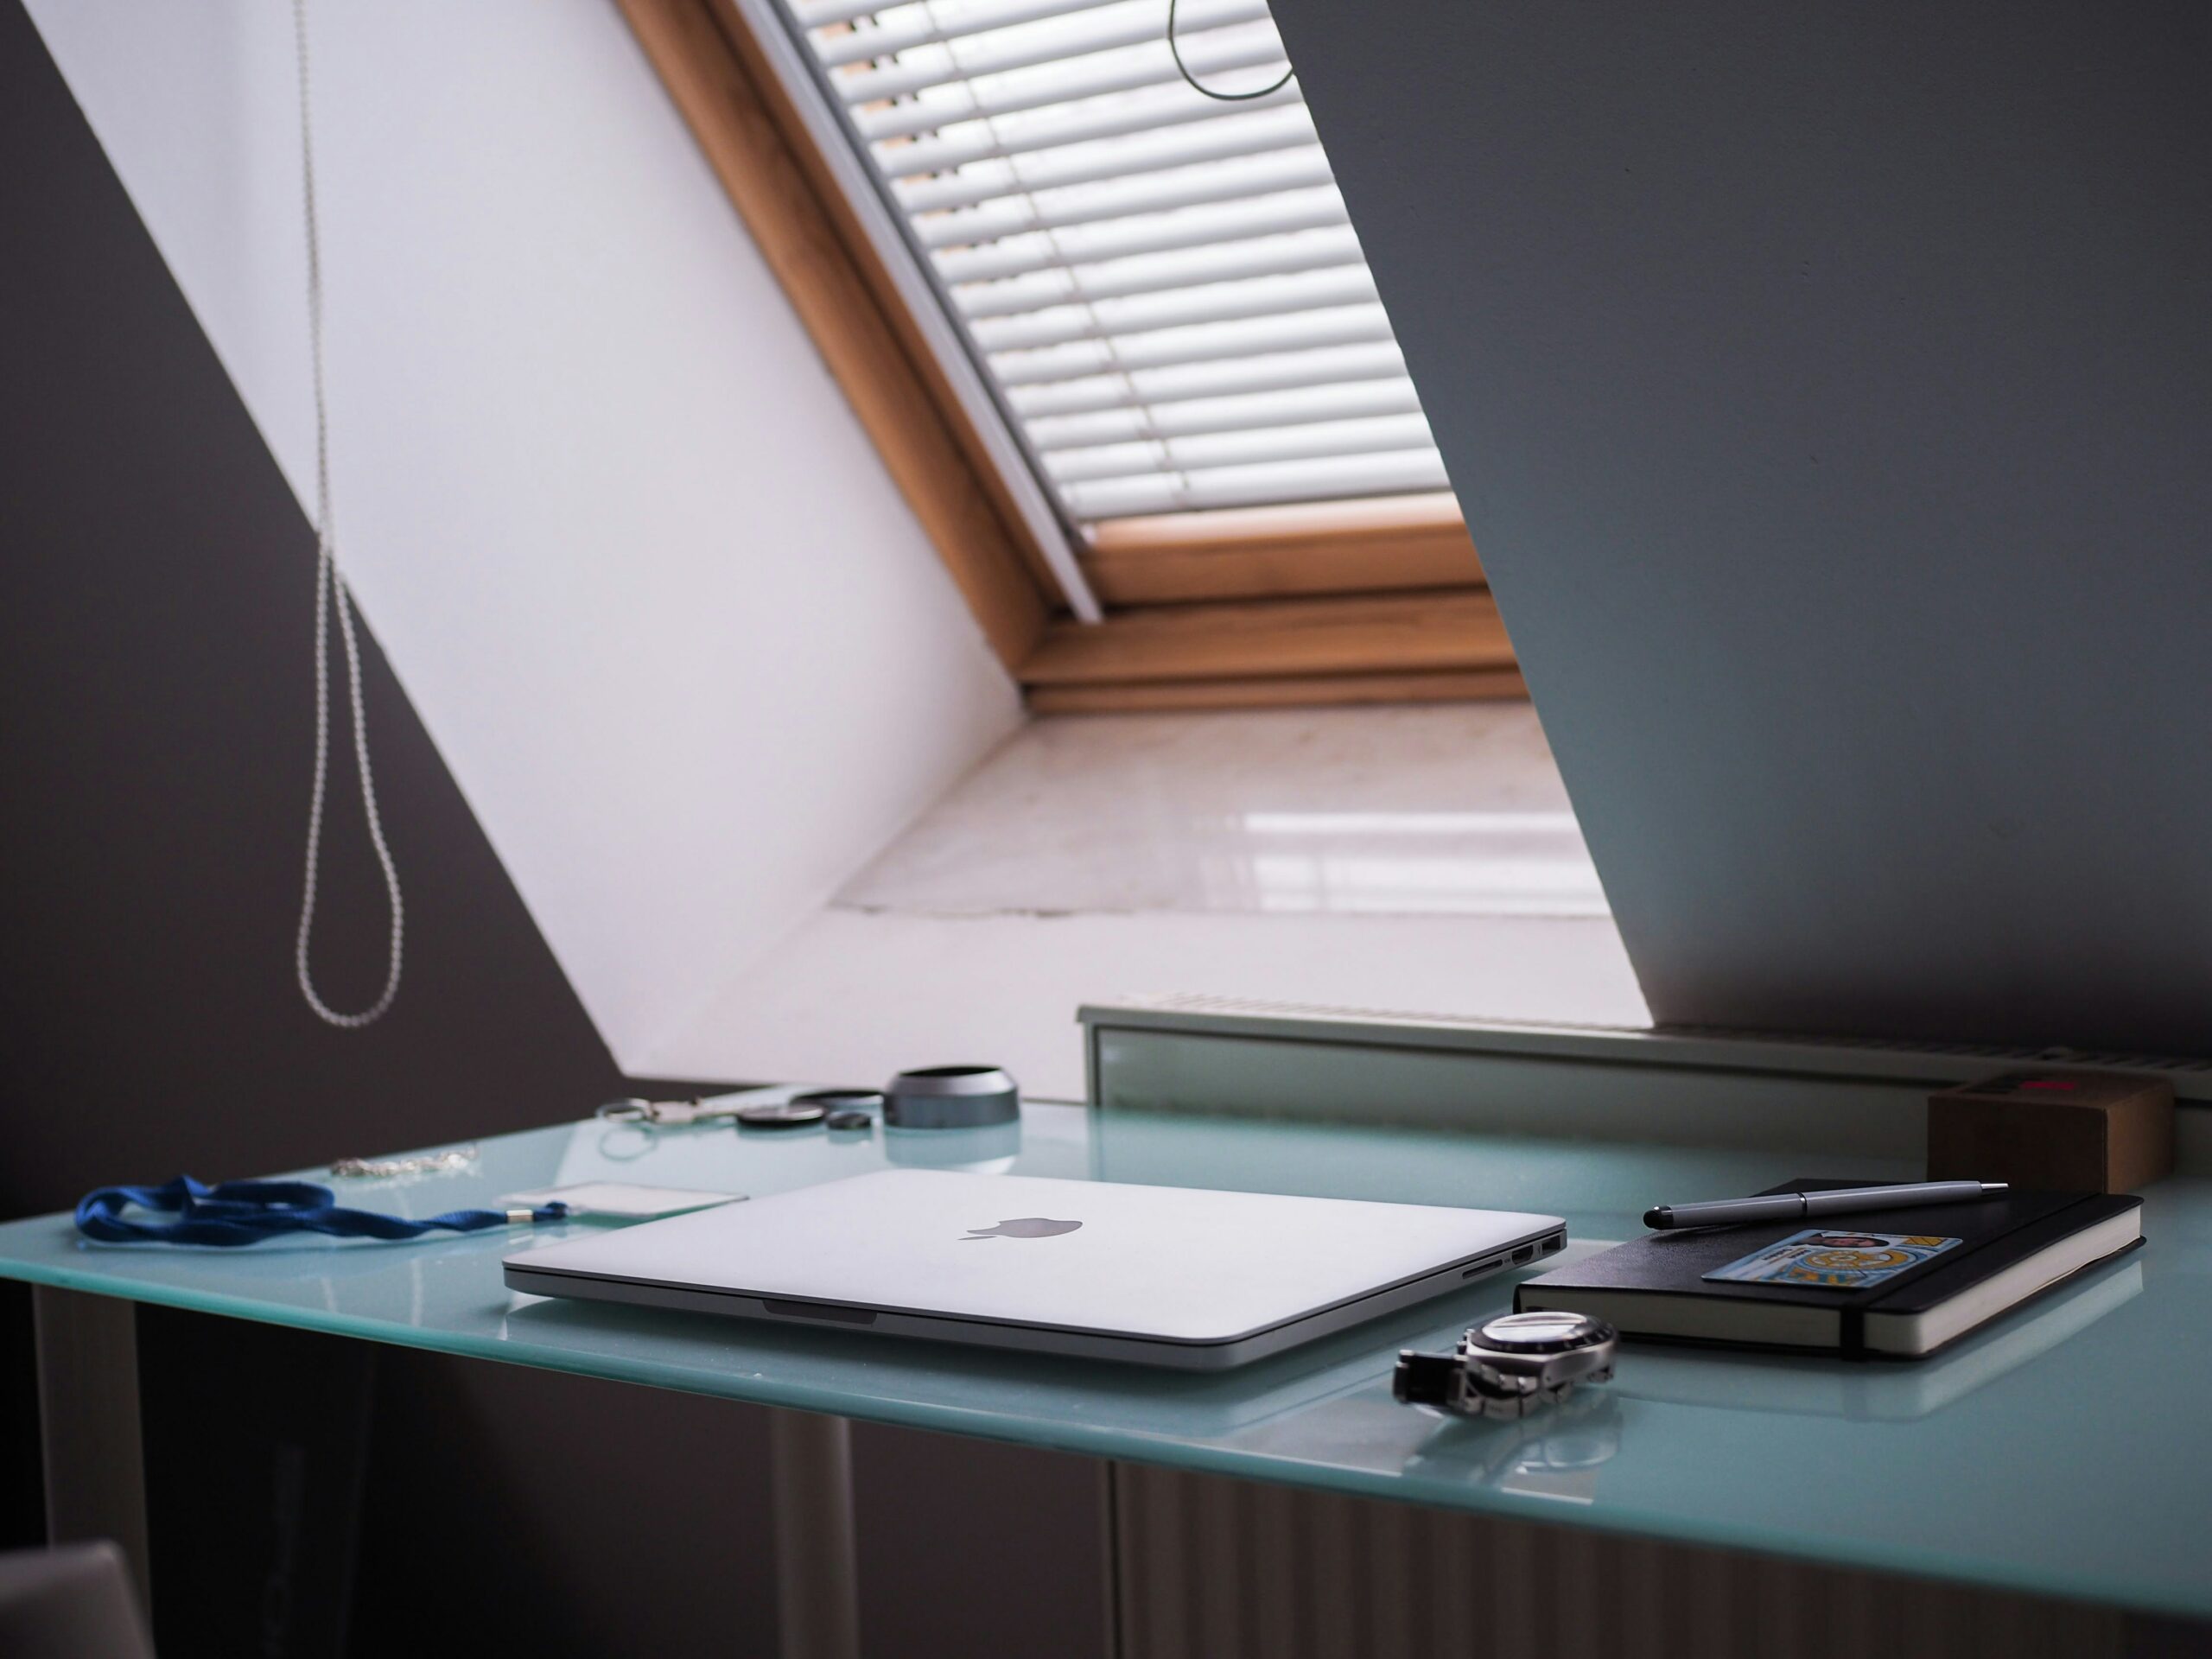 A desk in the foreground with a skylight in the background